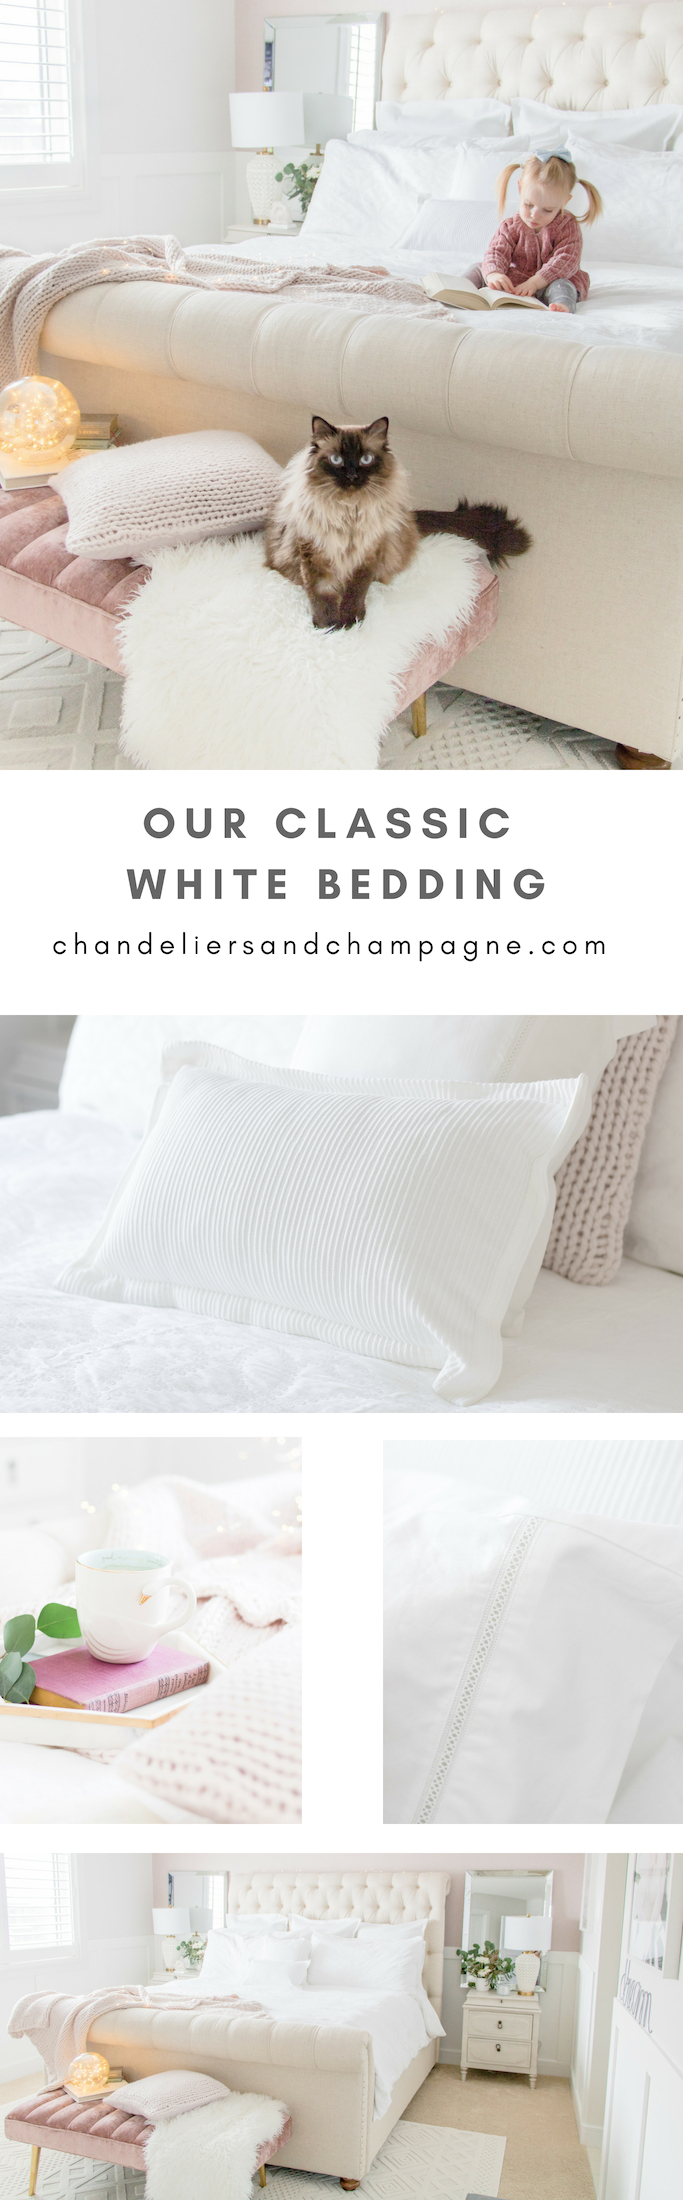 Classic white bedding adds a crisp, fresh look to our newly designed bedroom decorated in whites, neutrals and blush pink. Neutral bedroom design ideas.